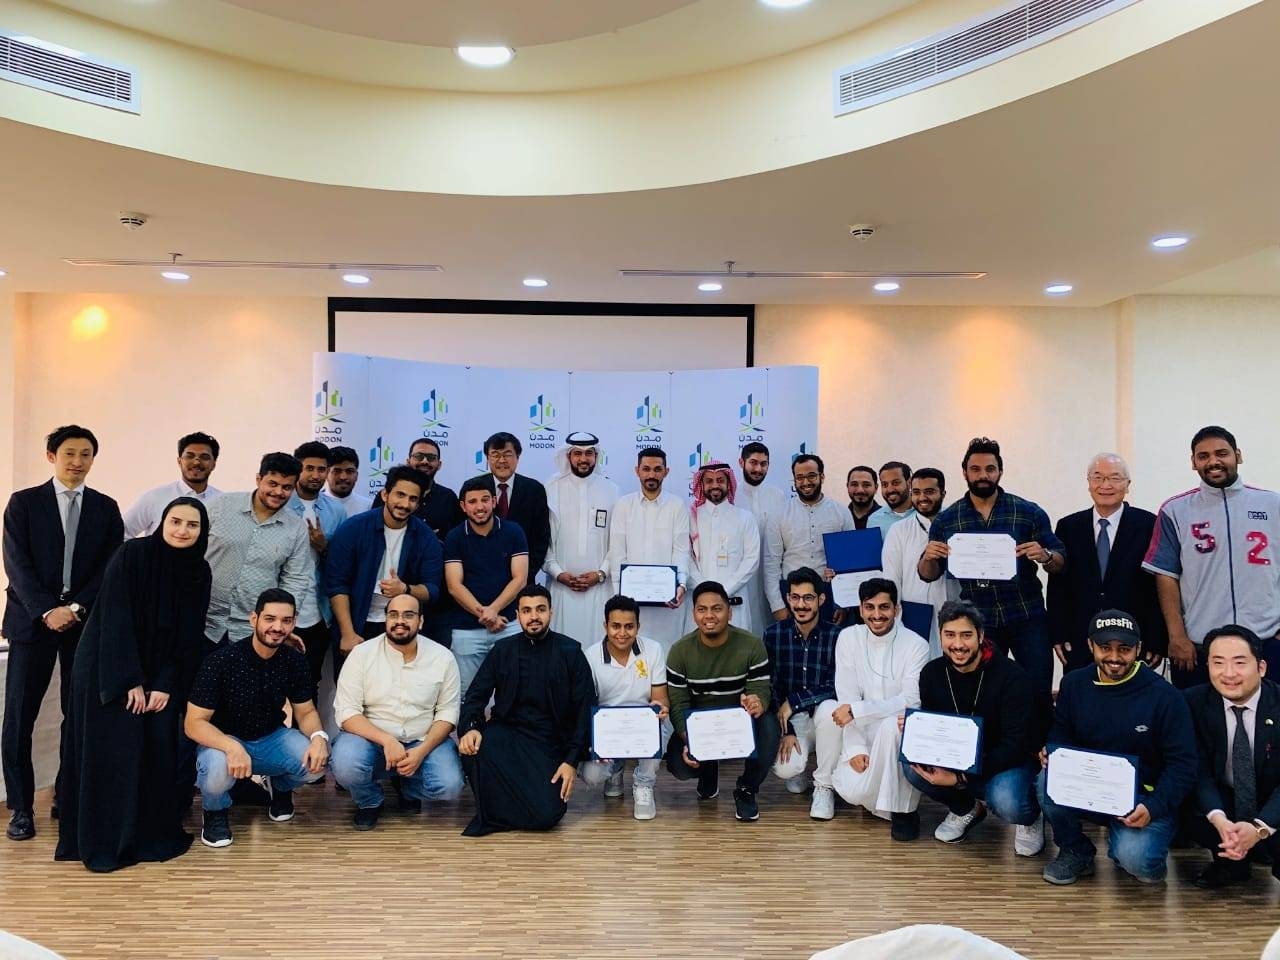 Saudi engineers made the most a five-day training program on lean production, which was conducted at the Saudi Authority for Industrial Cities and Technology Zones (Modon) in Jeddah on Feb. 2-6.